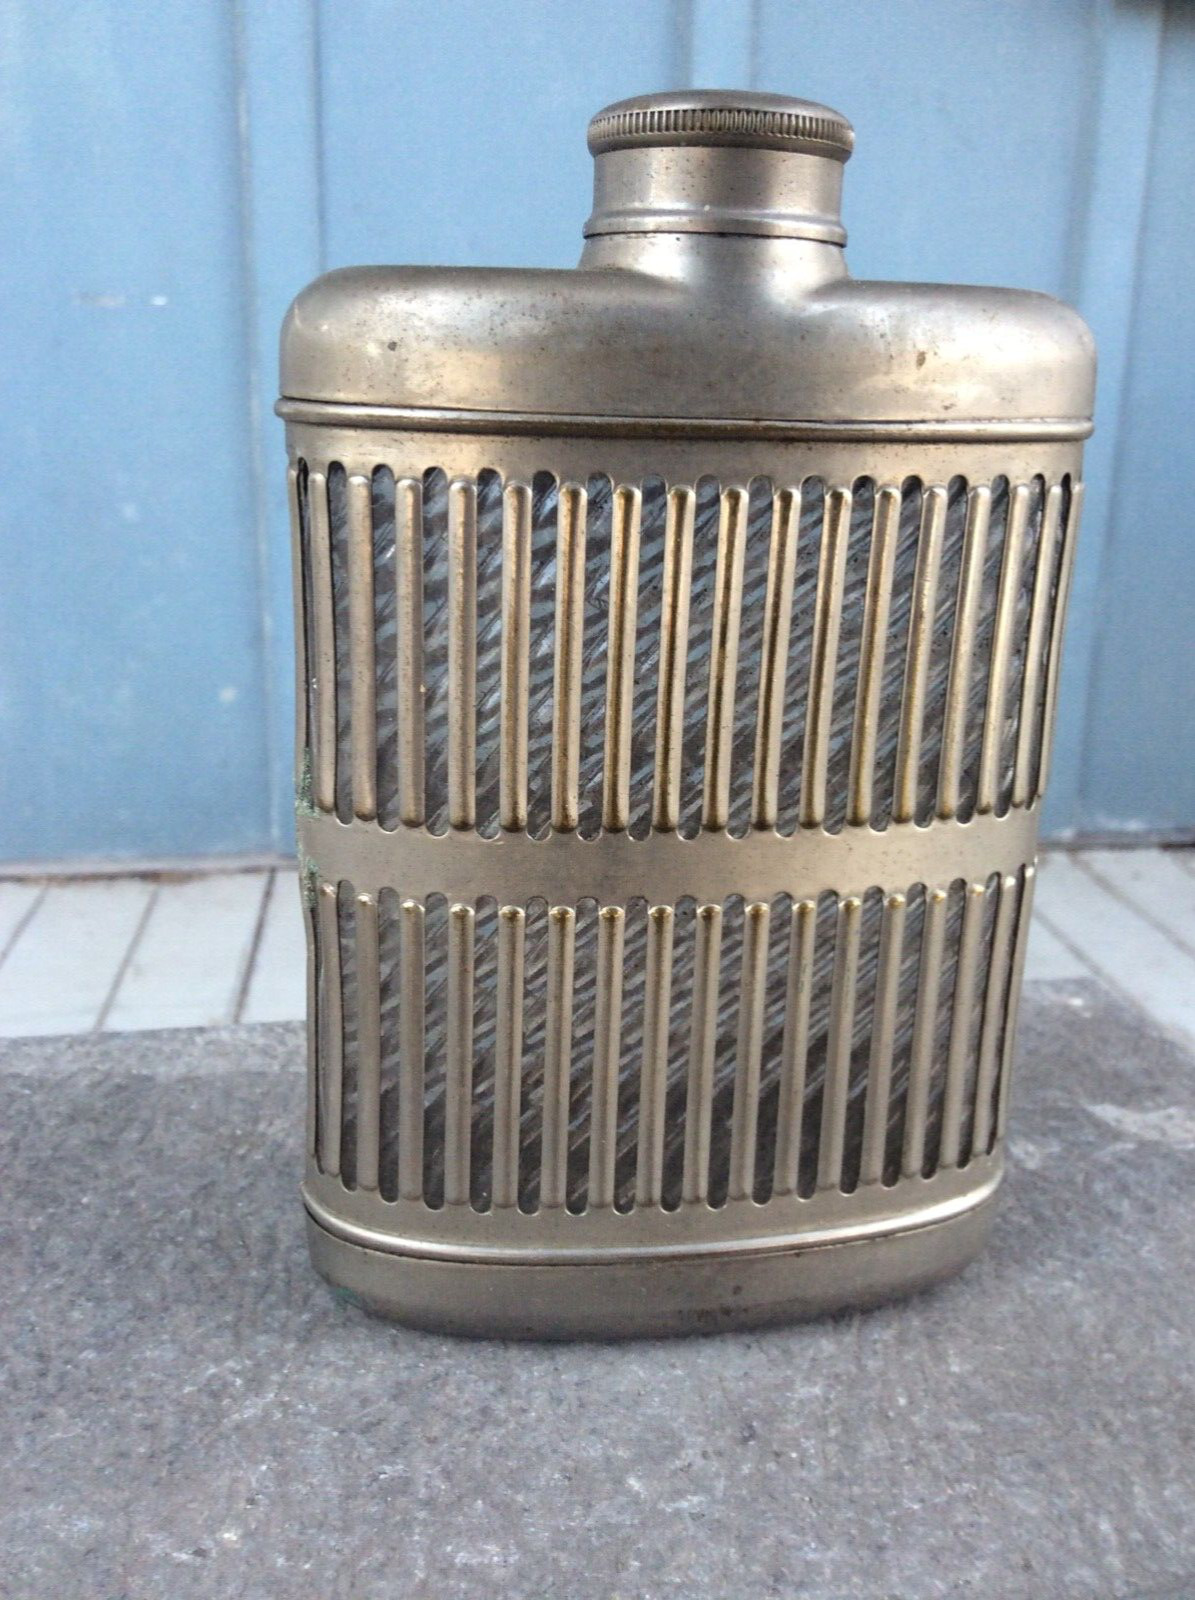 Flask Caged Glass Screw Off Cork Lid Chrome Plated ~ 1920's Prohibition Era #1